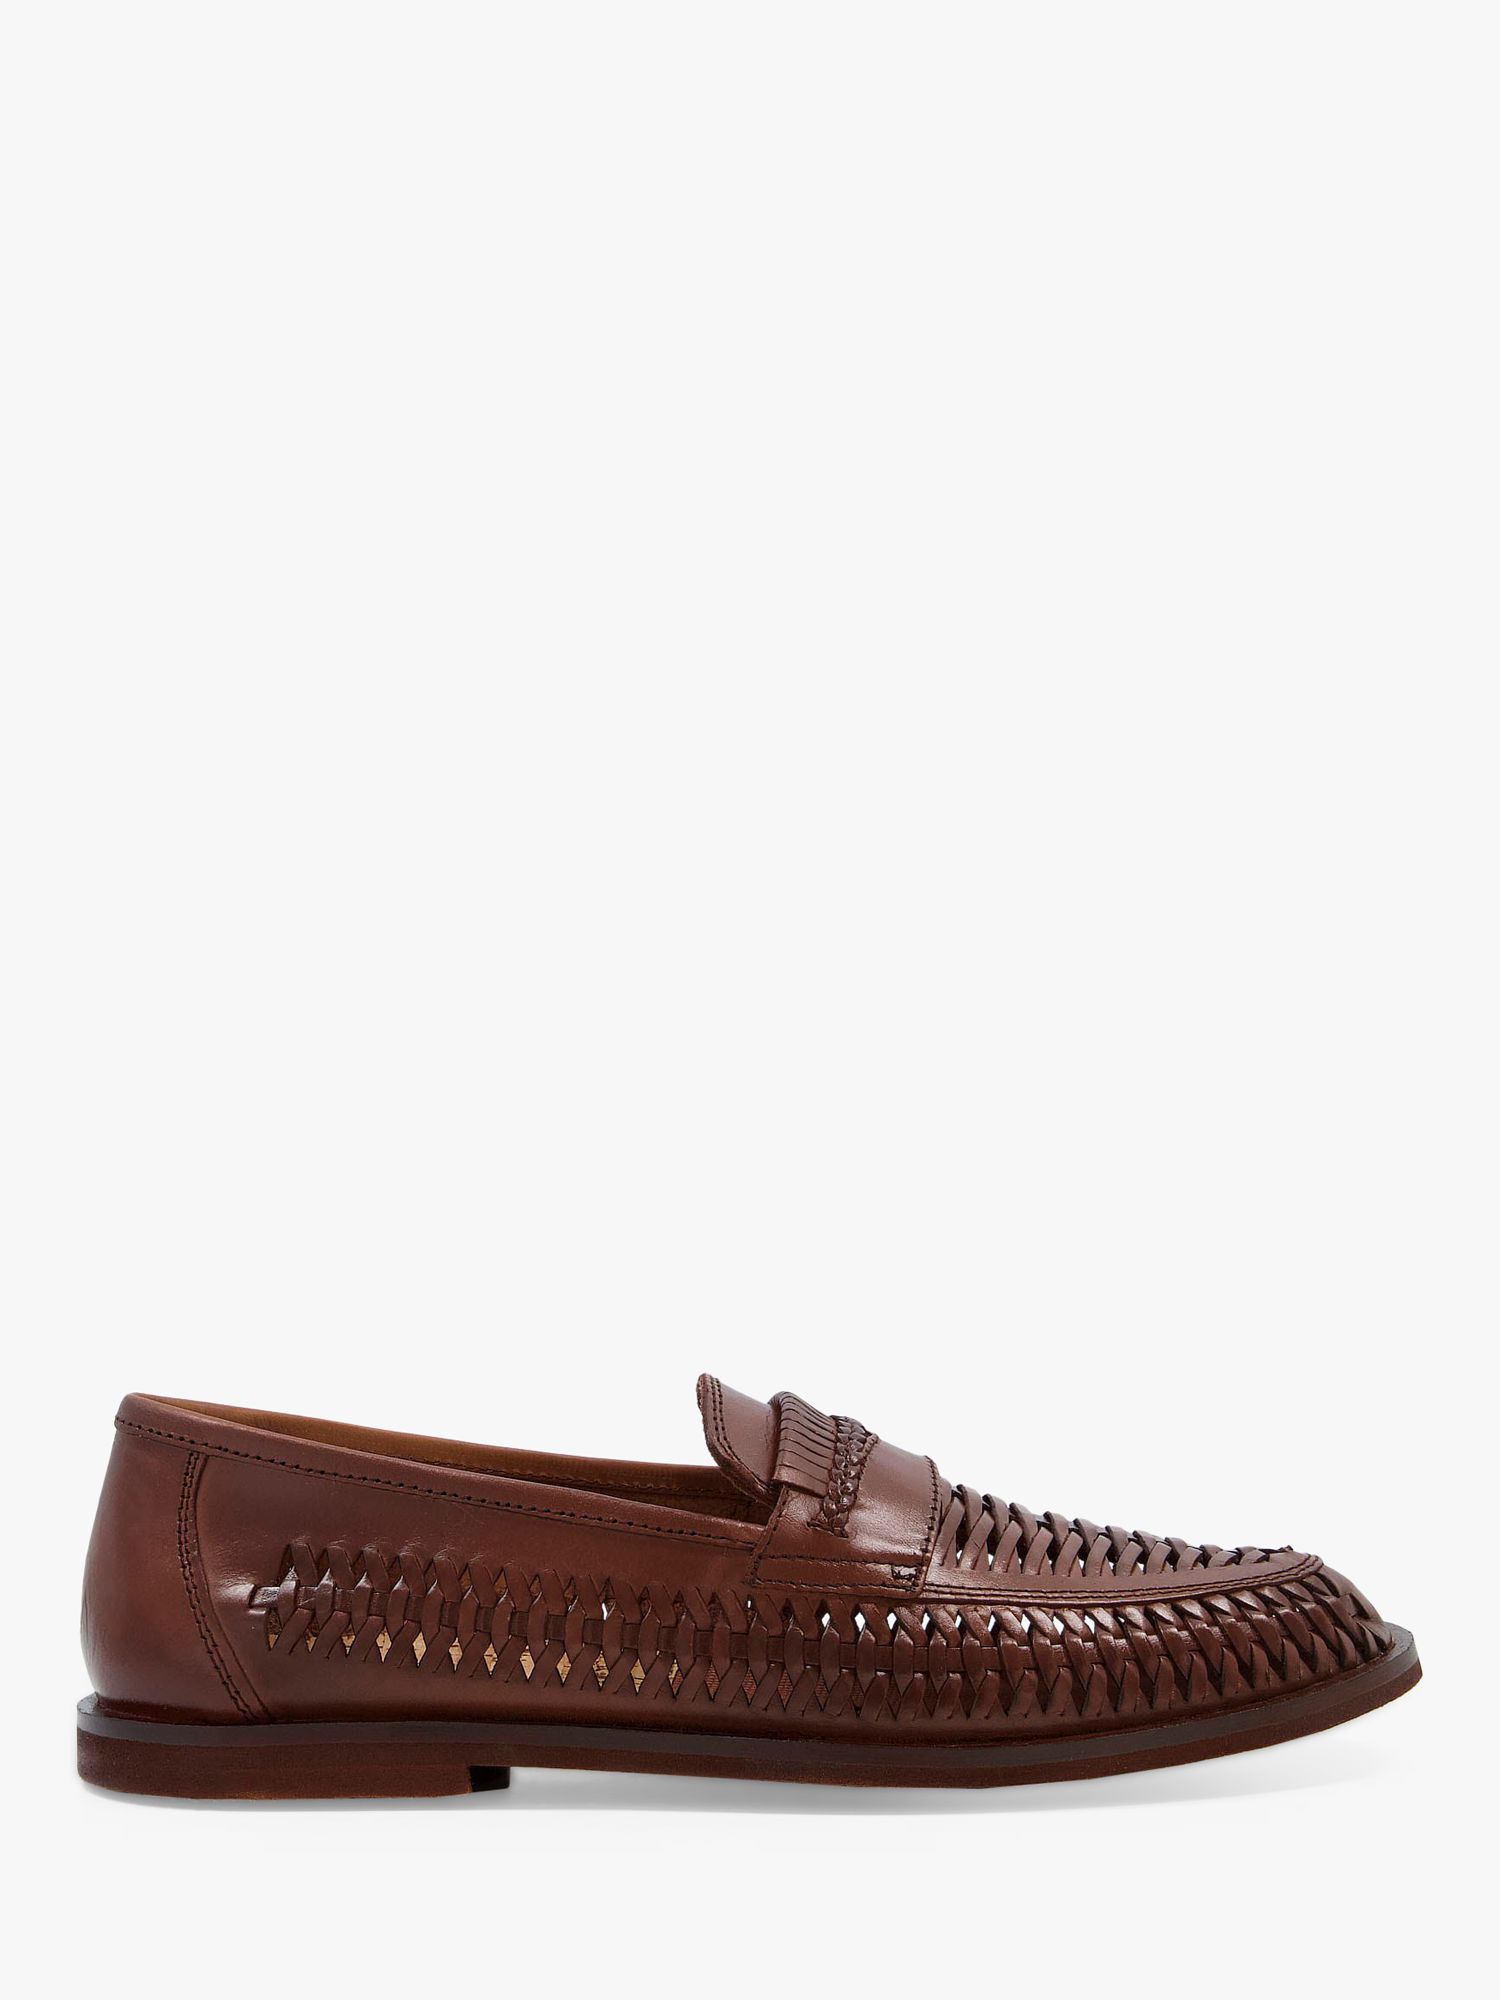 Dune Woven Leather Loafers, Tan at John Lewis & Partners